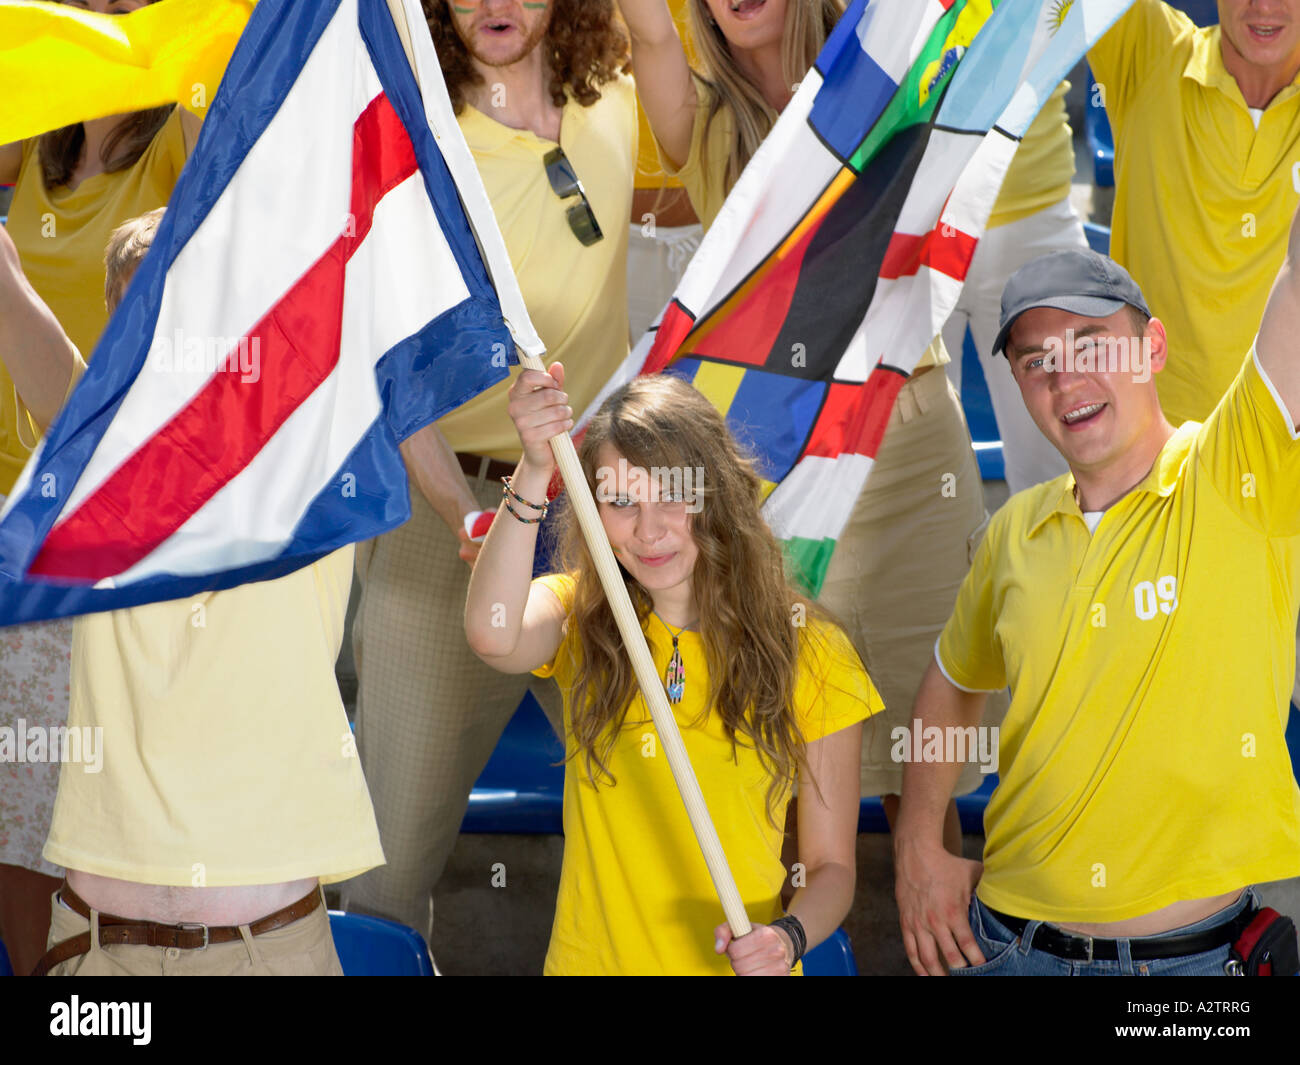 Supporters waving flags Stock Photo